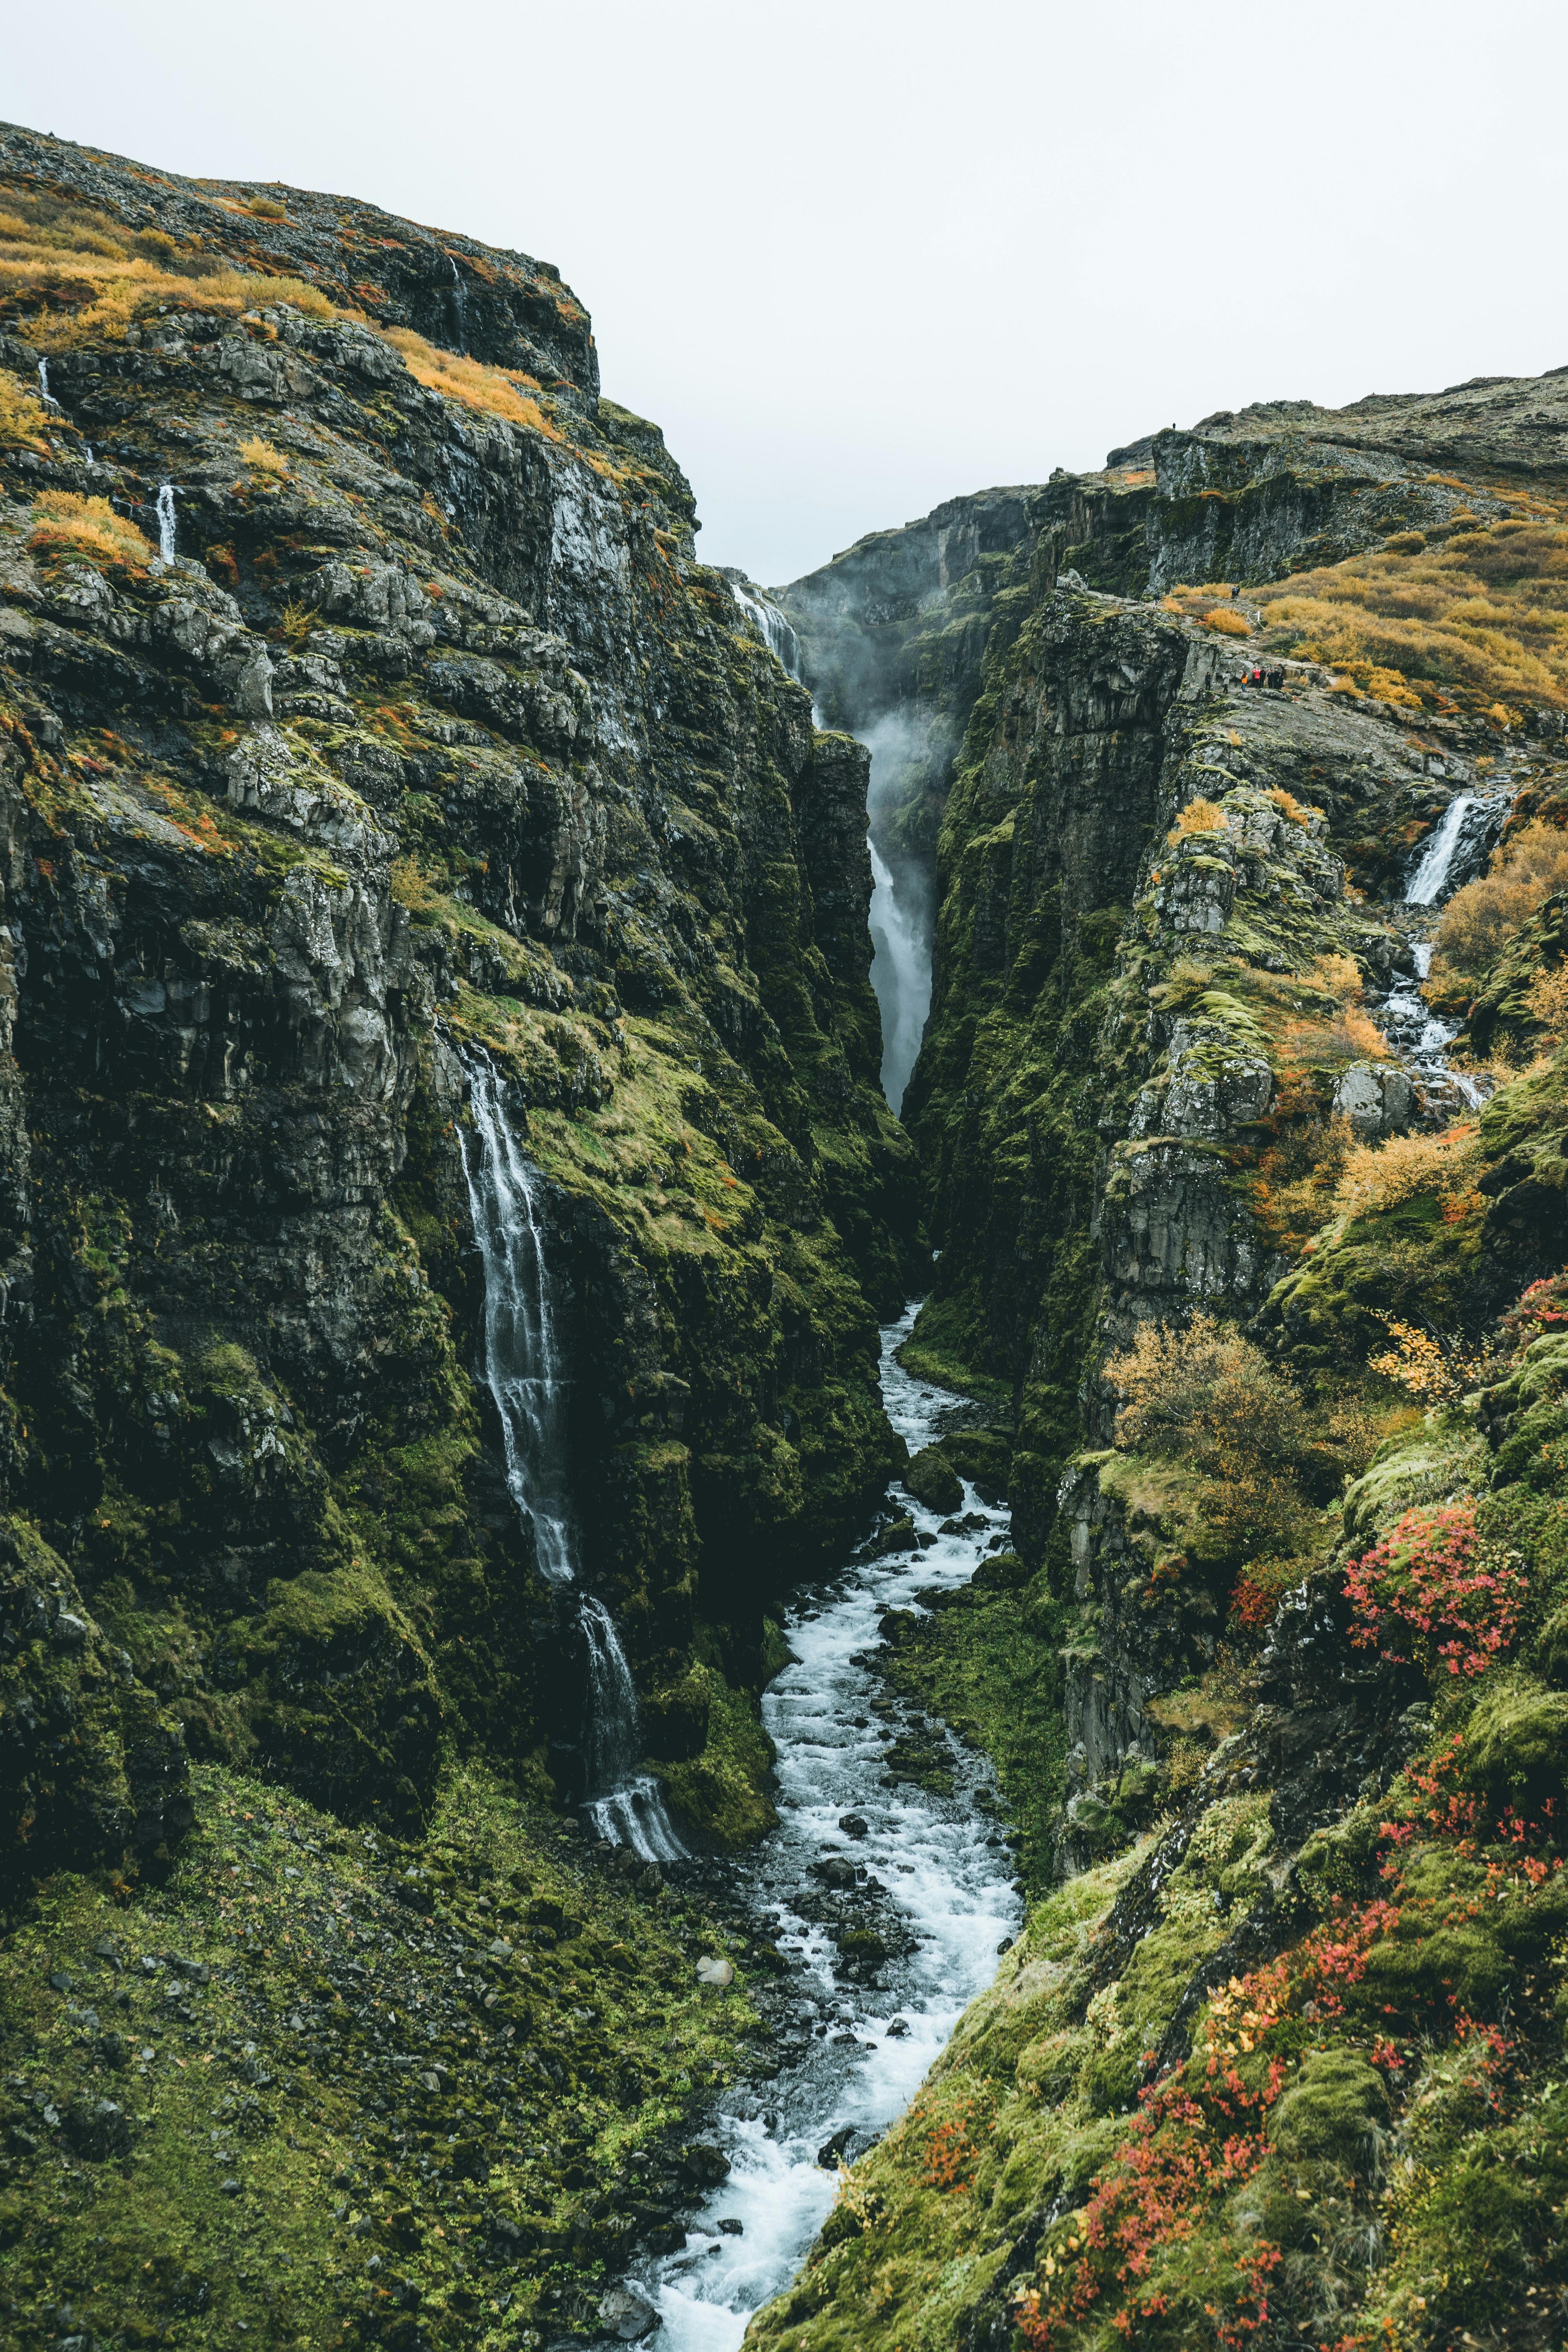 A narrow, verdant canyon dotted with small waterfalls cascading down its rocky cliffs, with a river flowing through the gorge surrounded by autumn-colored foliage.